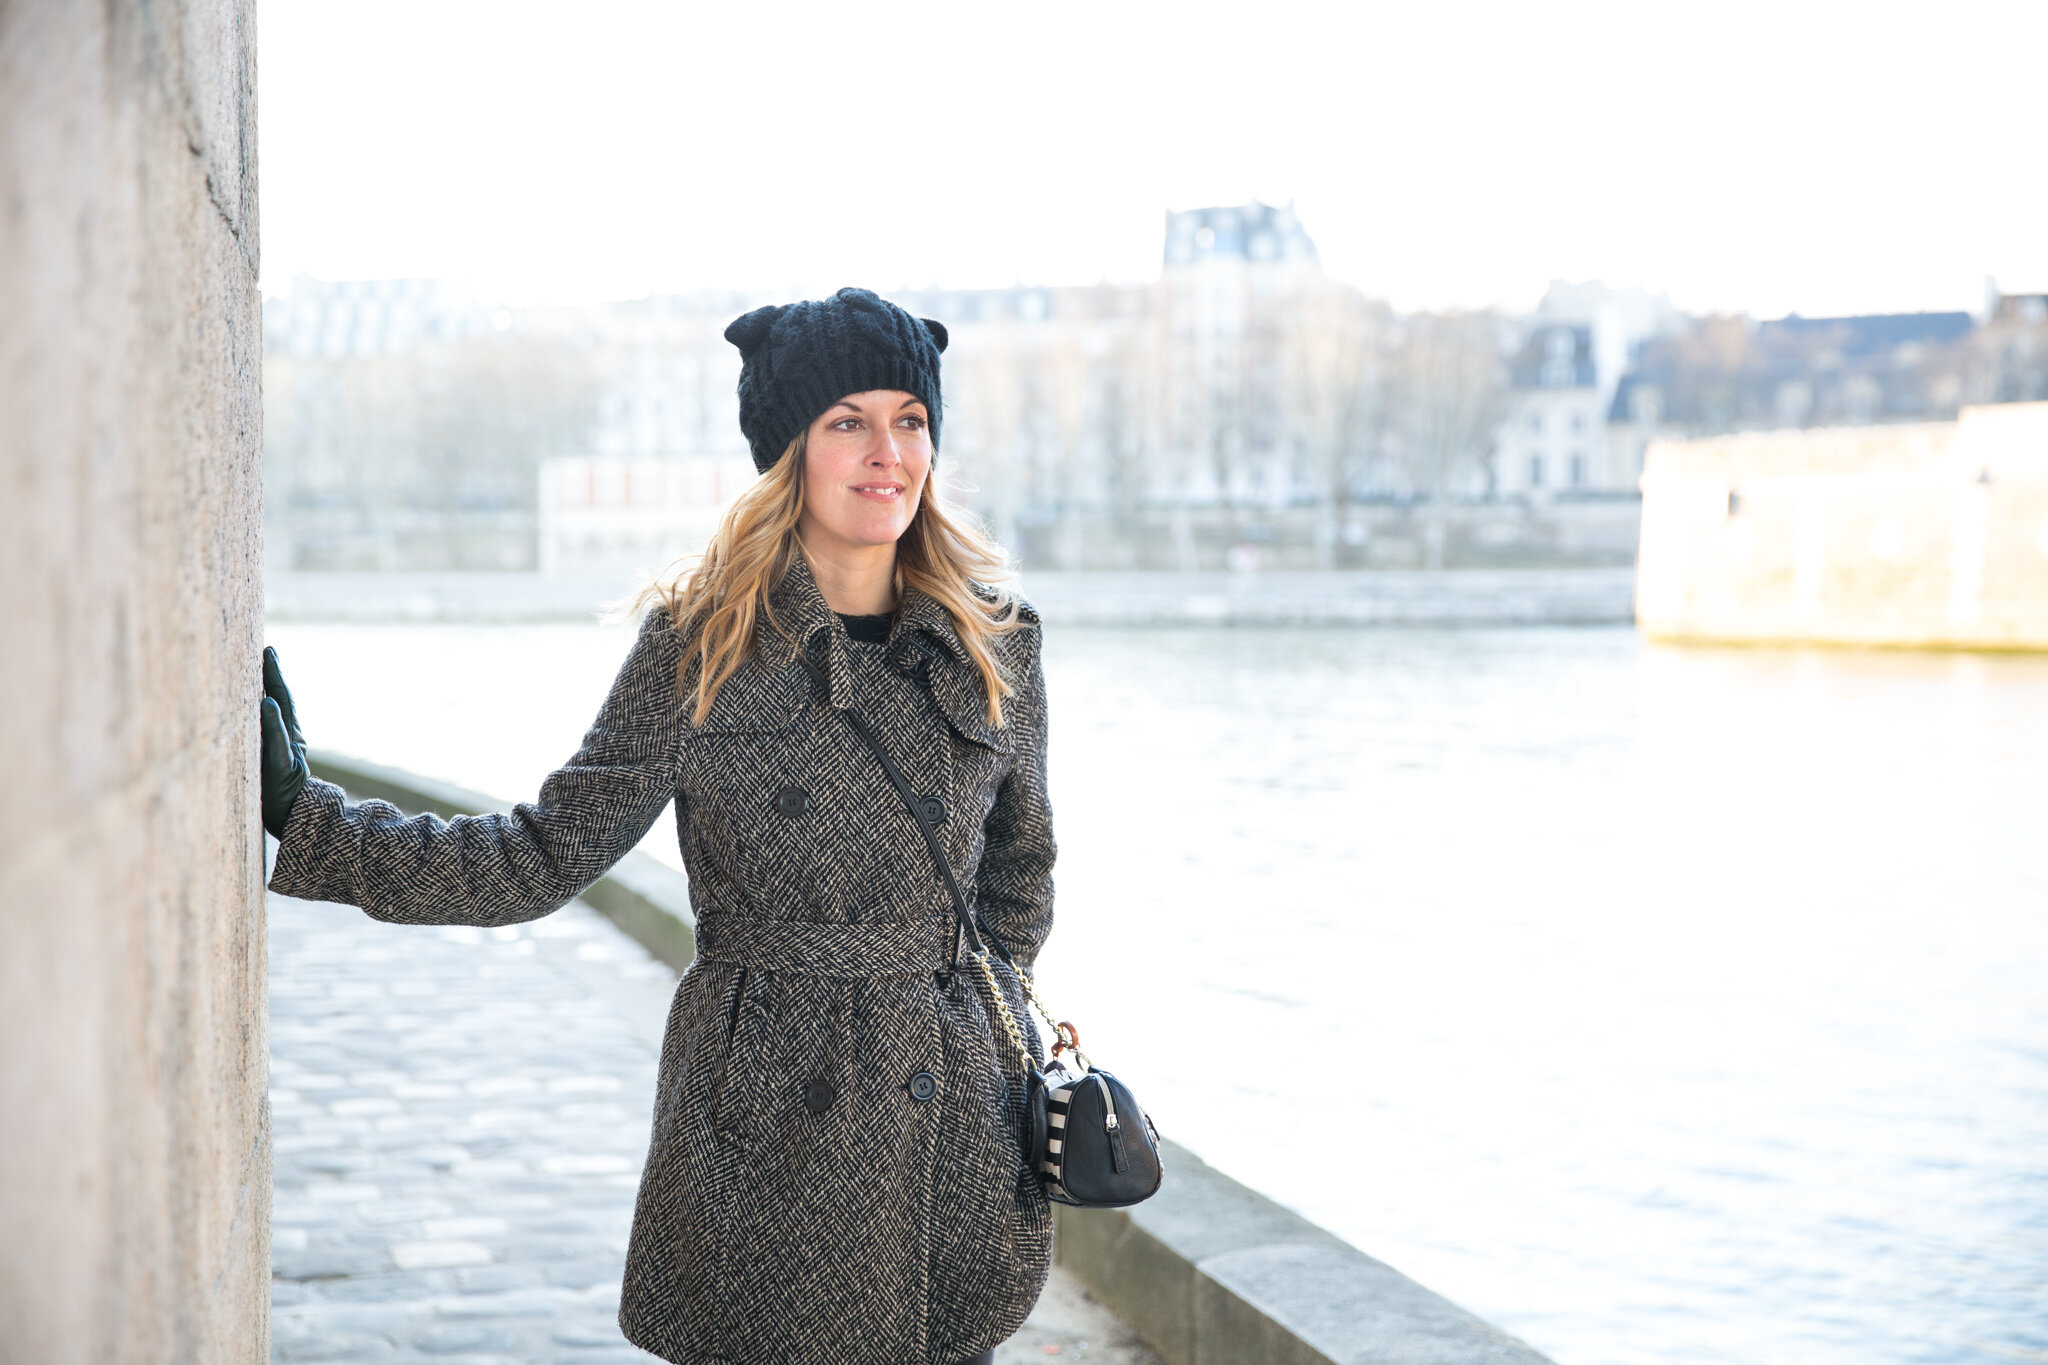  english-speaker-leans-on-notre-dame-quais-wall-overlooking-water 